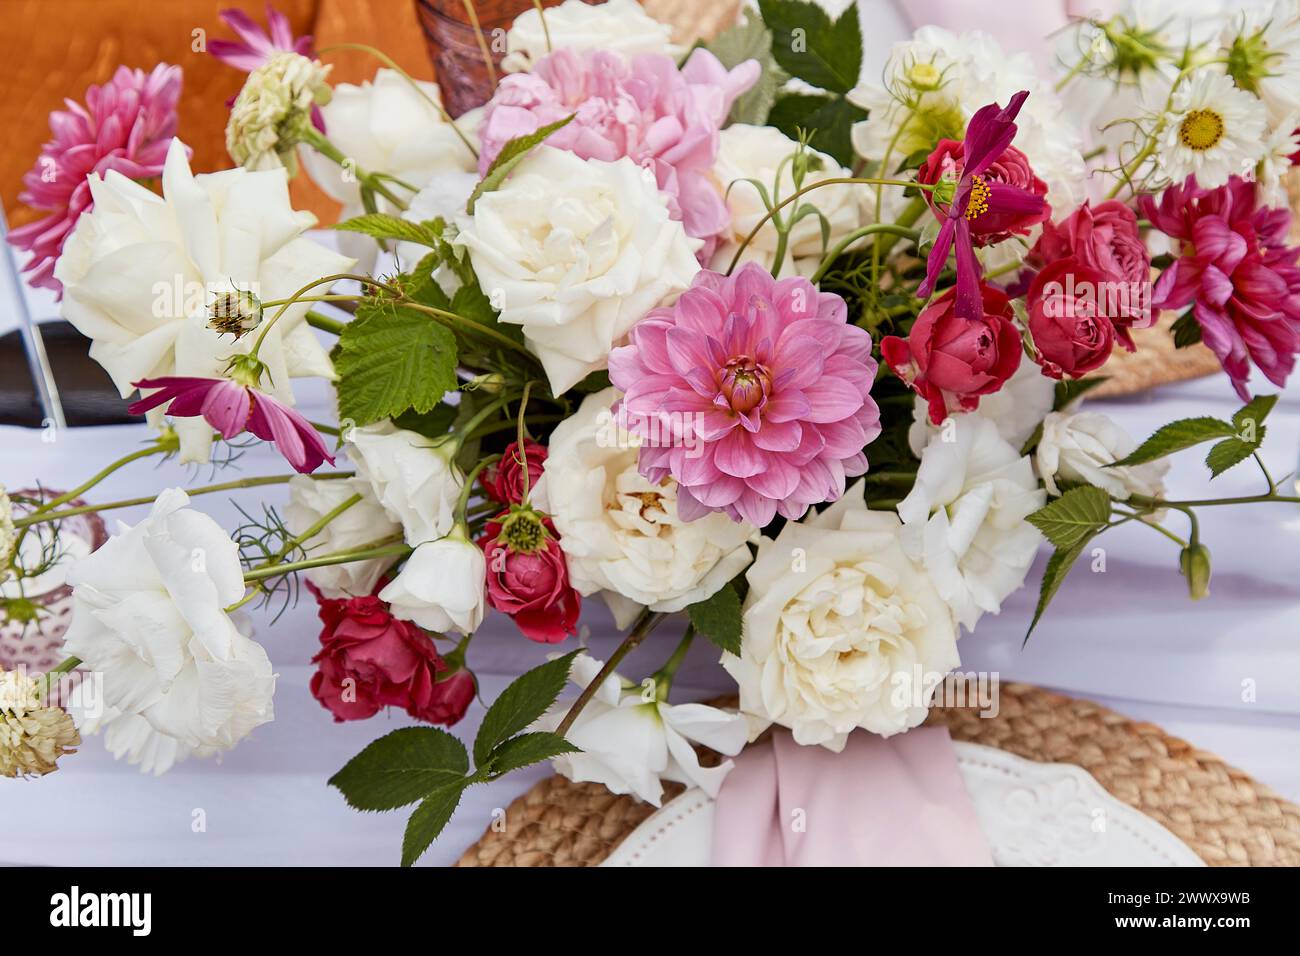 Vibrant bouquet with mix of pink dahlias and white roses. Floral design inspiration and botanical art. Stock Photo